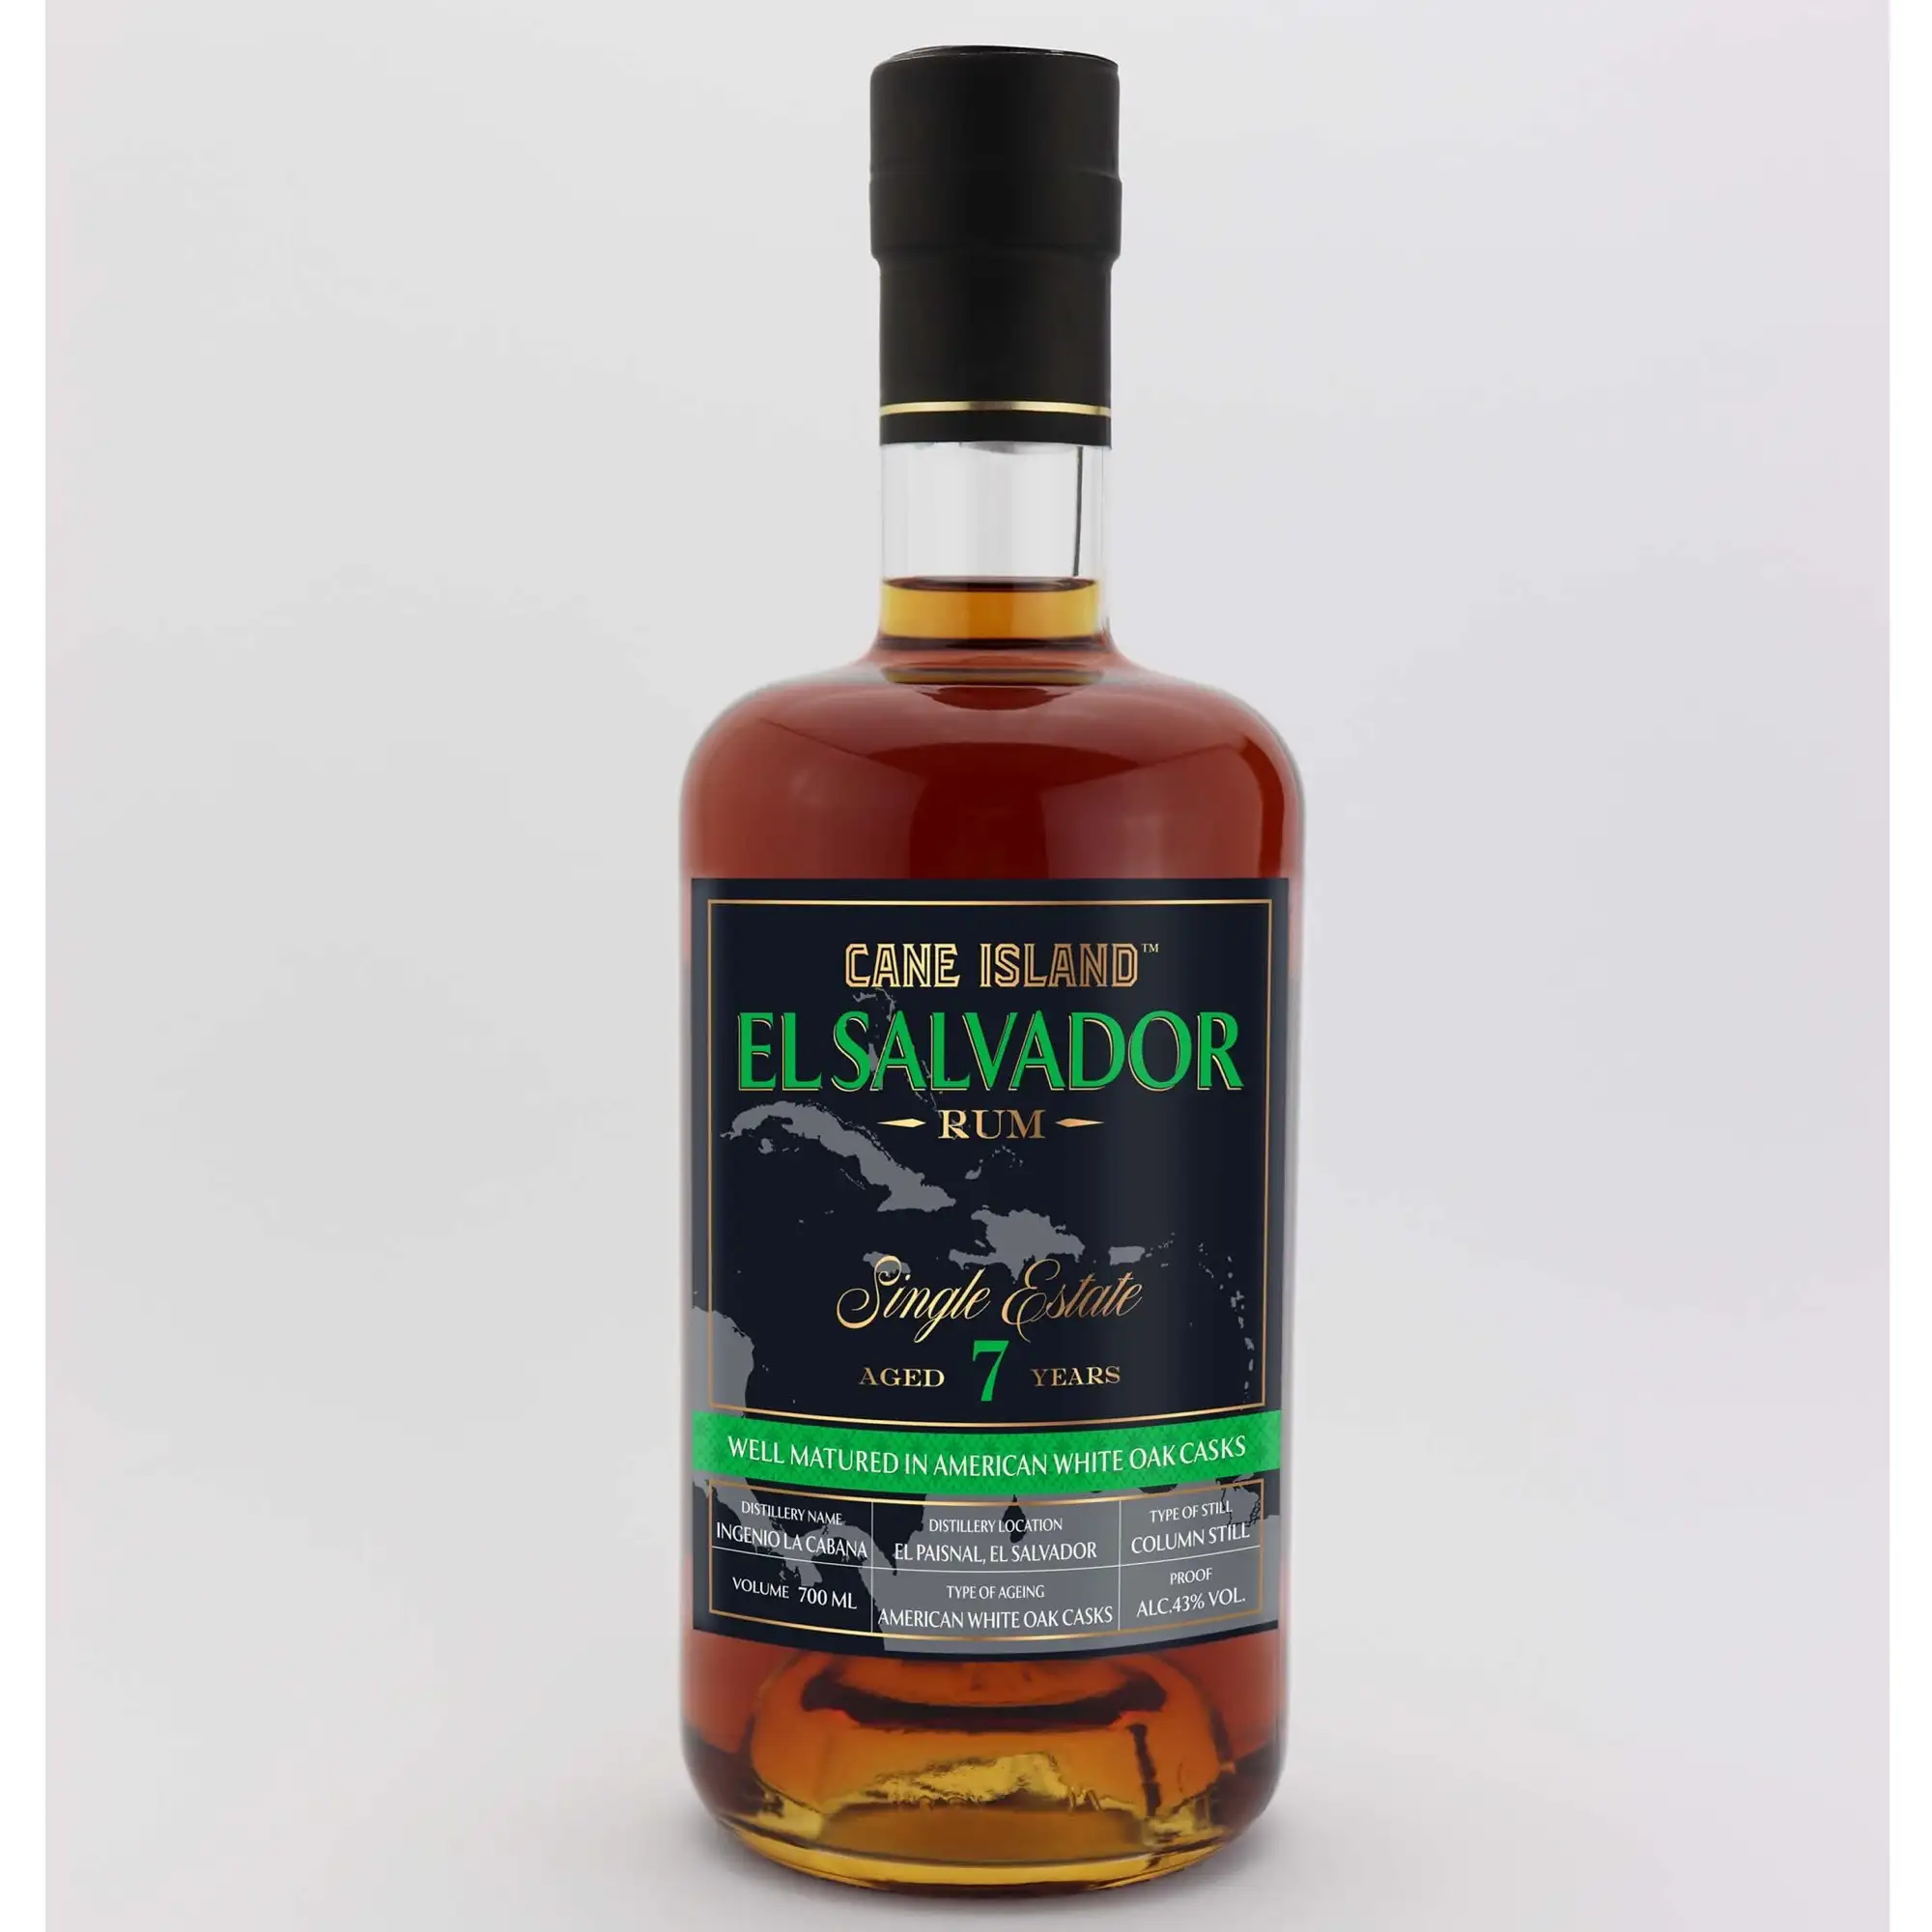 Image of the front of the bottle of the rum Single Estate